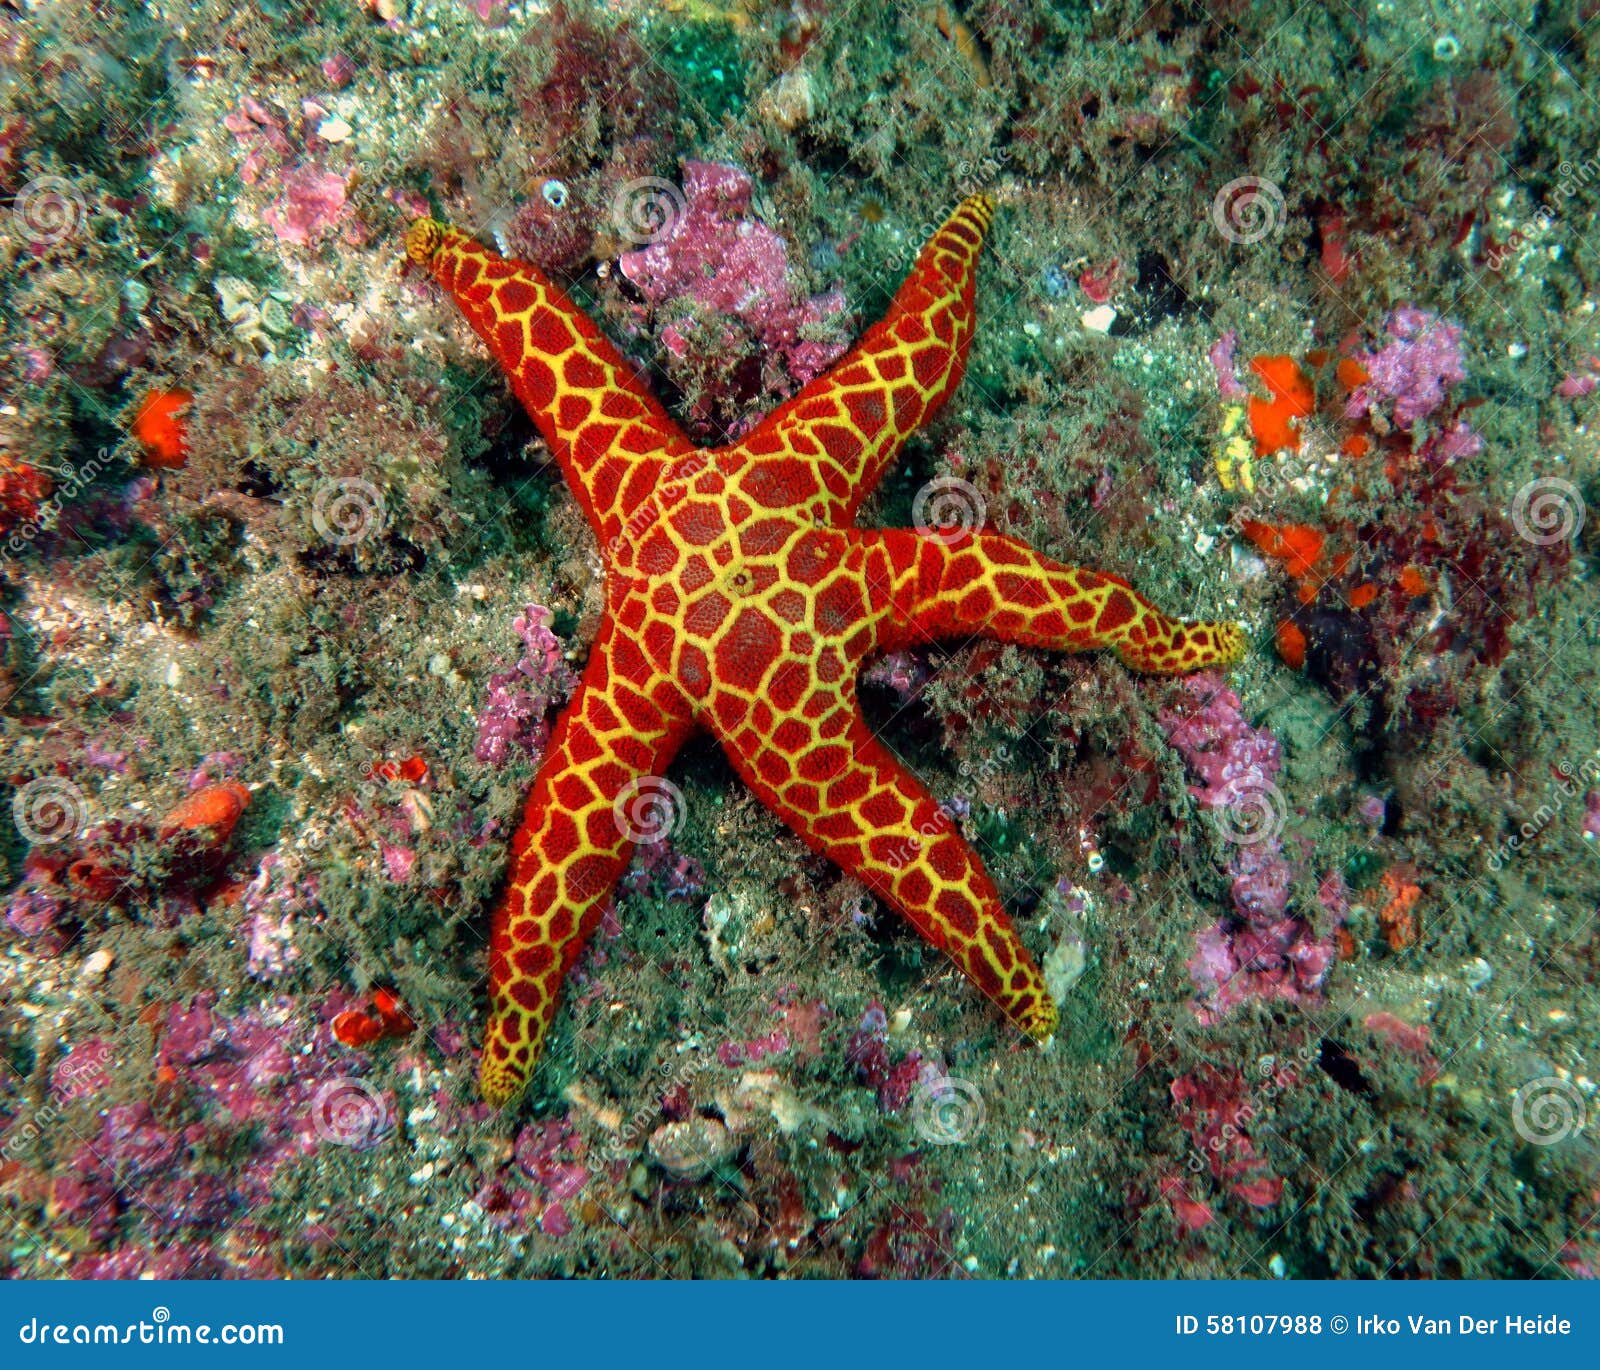 red and yellow seastar